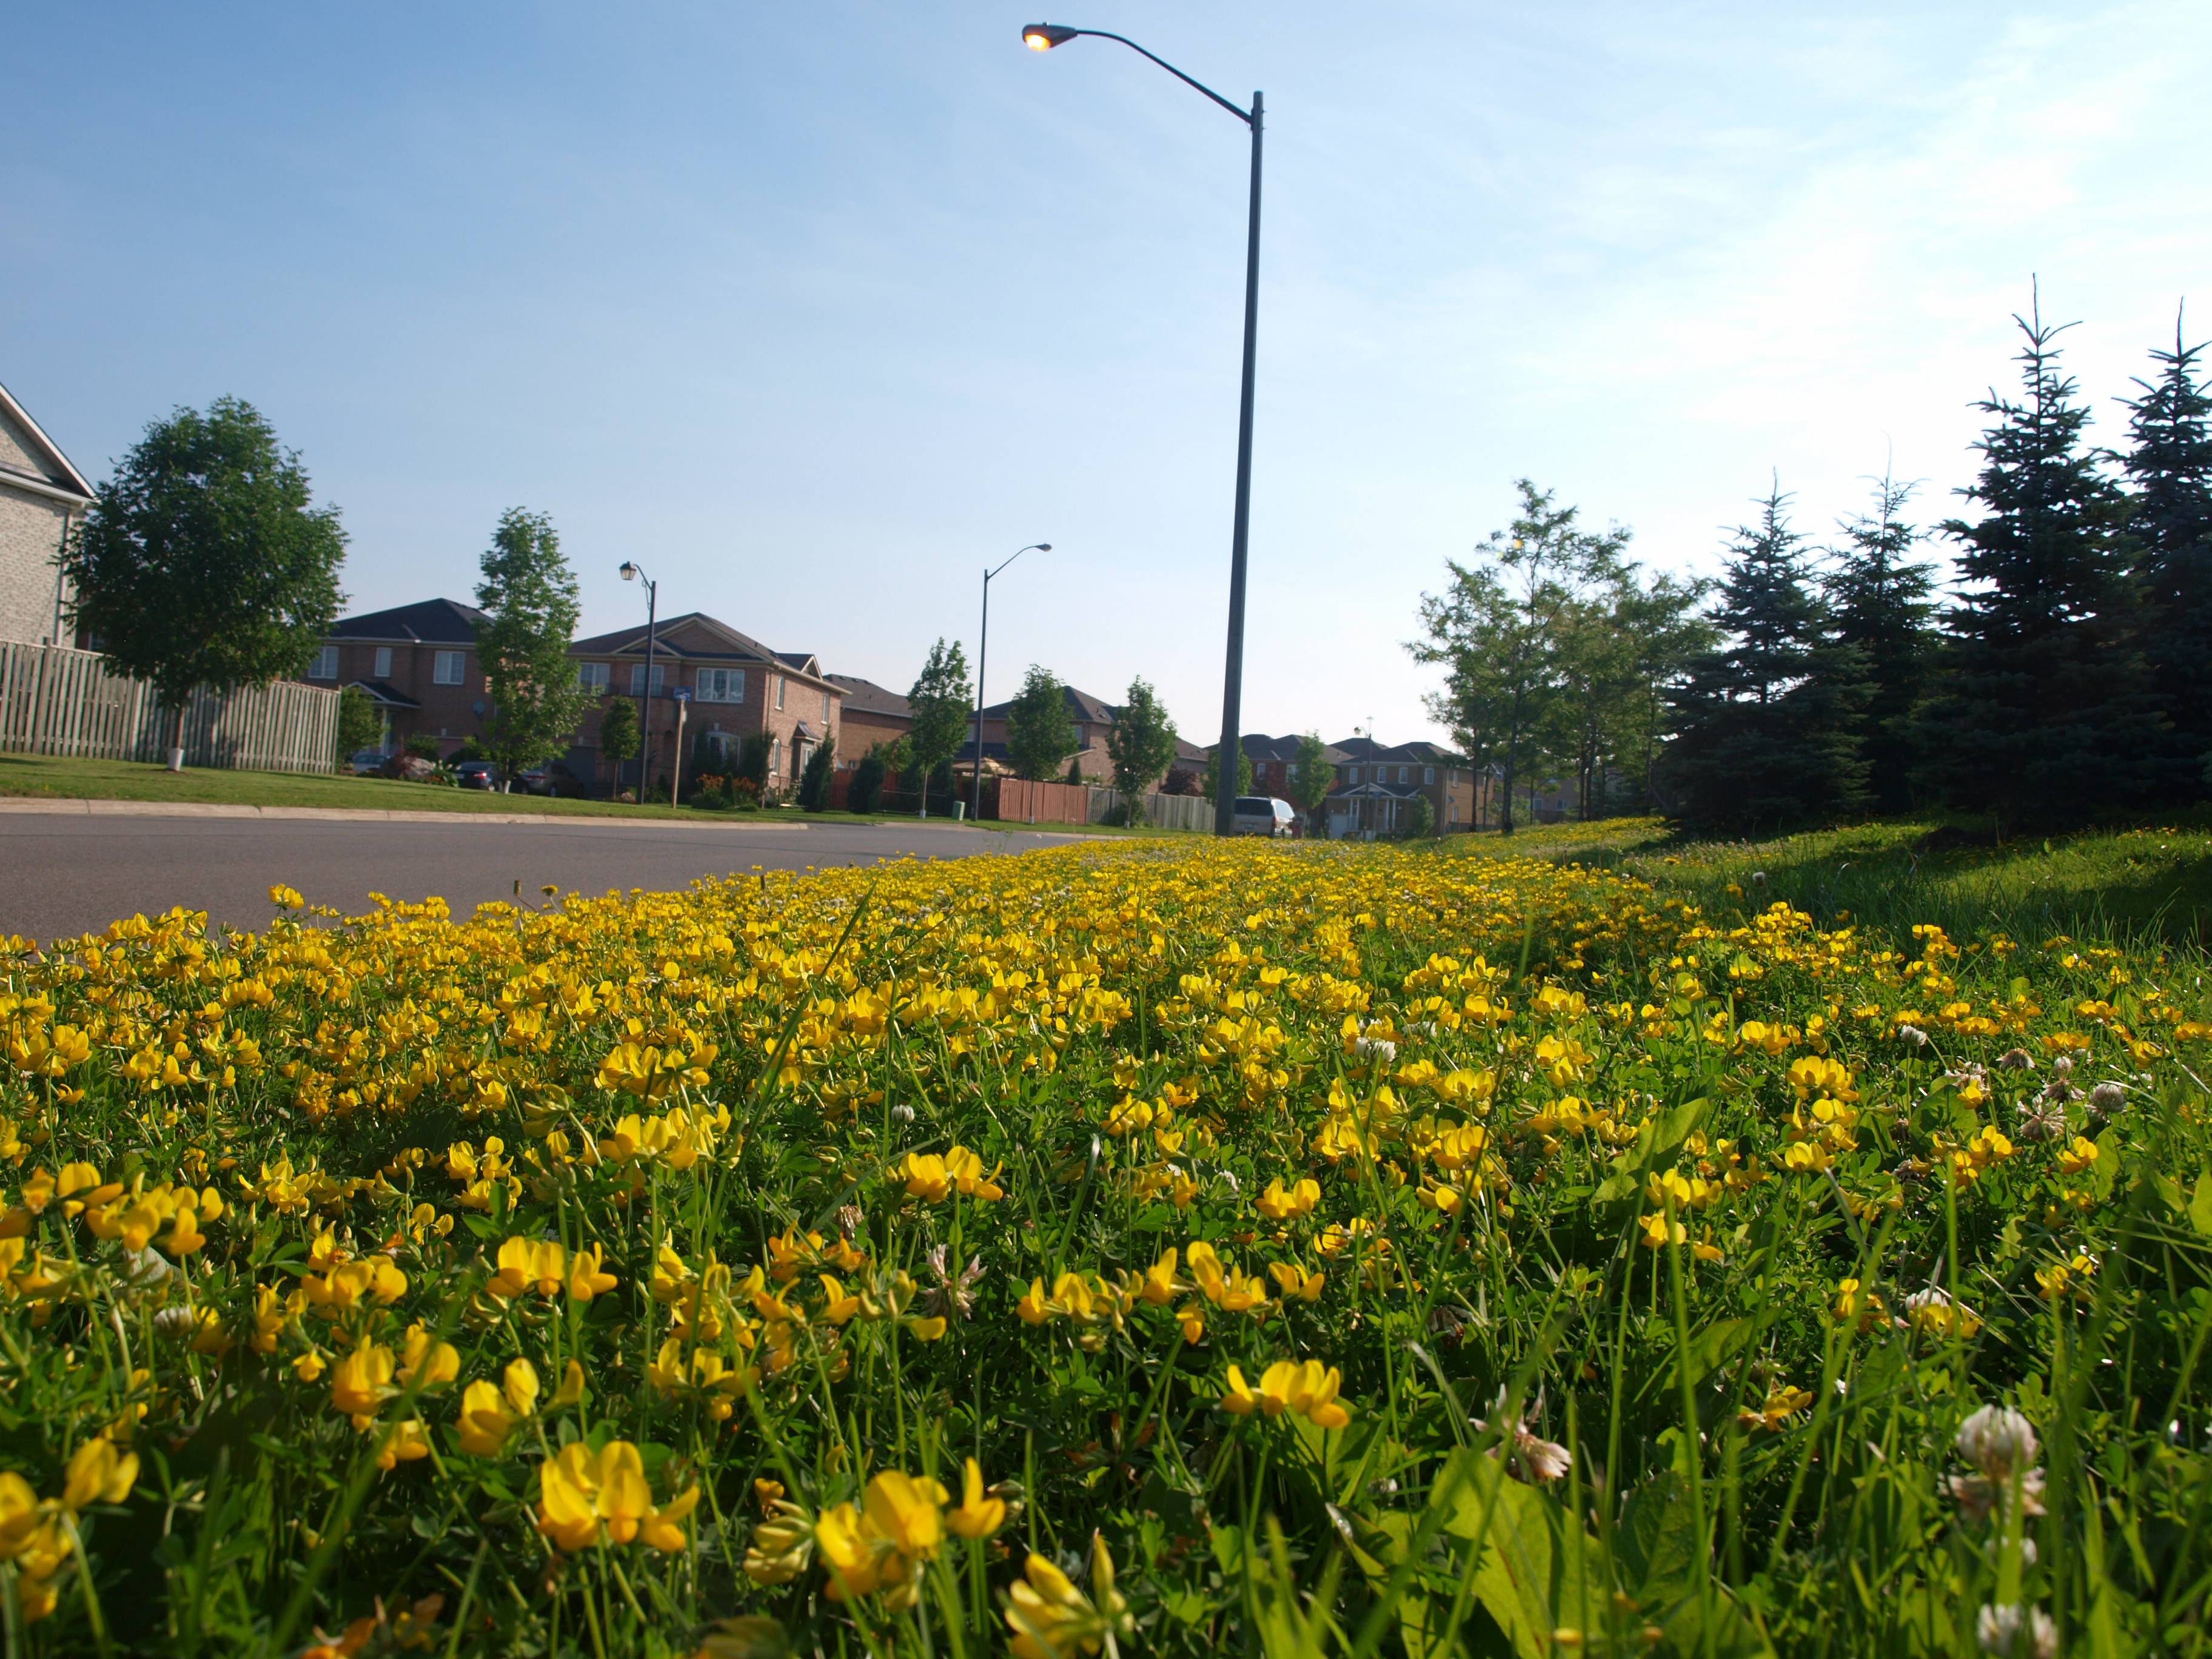 PHOTO: Nature and Suburbia - The Meadows of Mississauga - Spacing National